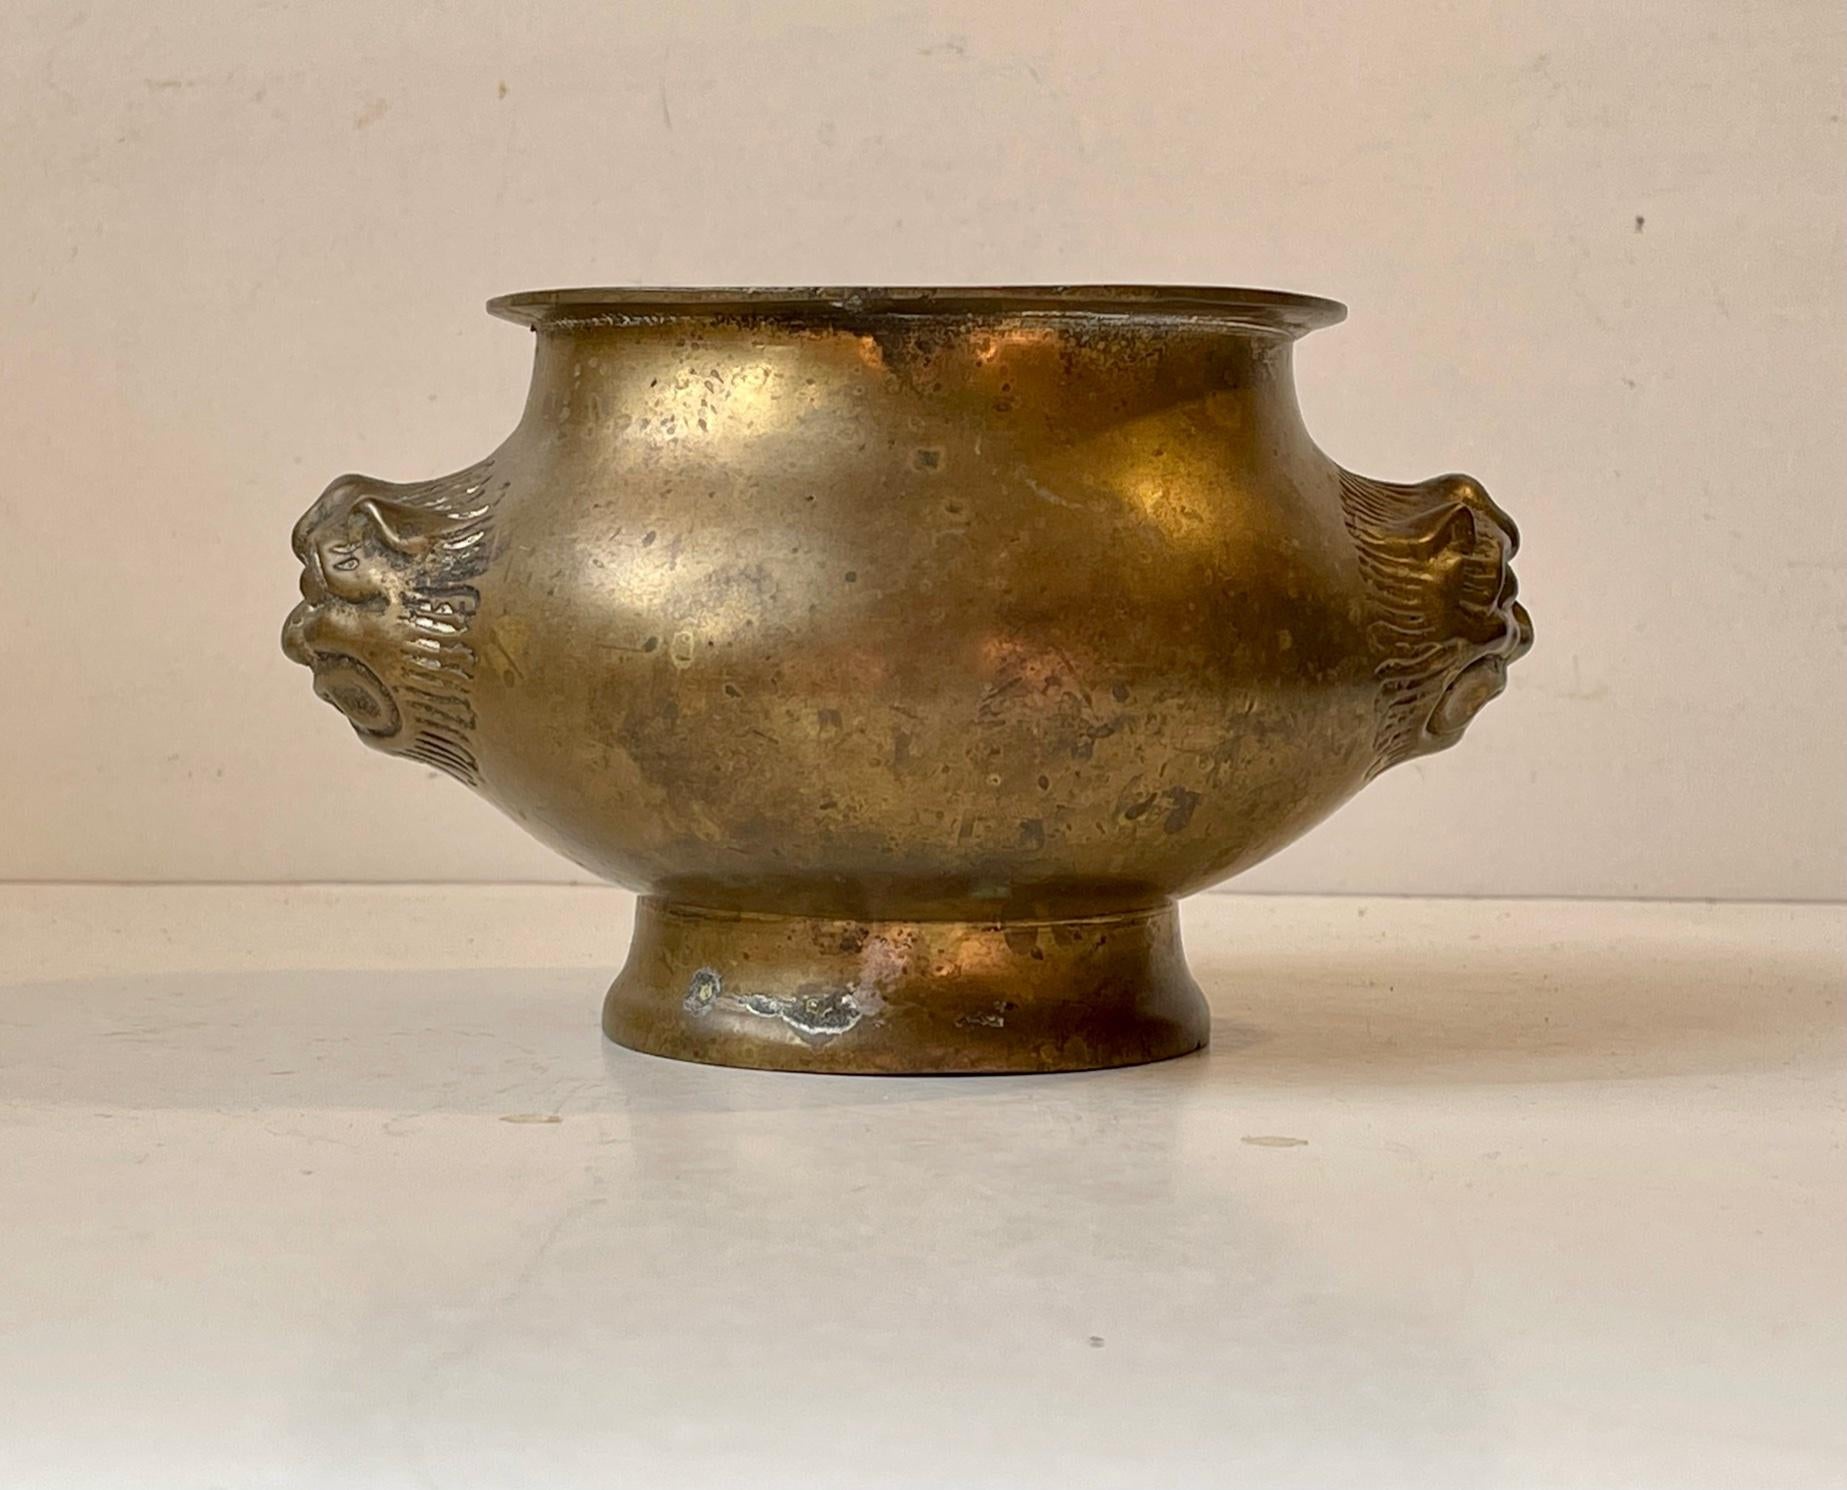 An Indian Lota or jardiniere/planter in patinated brass. It is cast and features hand engraved lion heads to each side. A great authentic piece of decor in any Yoga or Meditation environment. Artisan made in India in the late 18th or early 19th